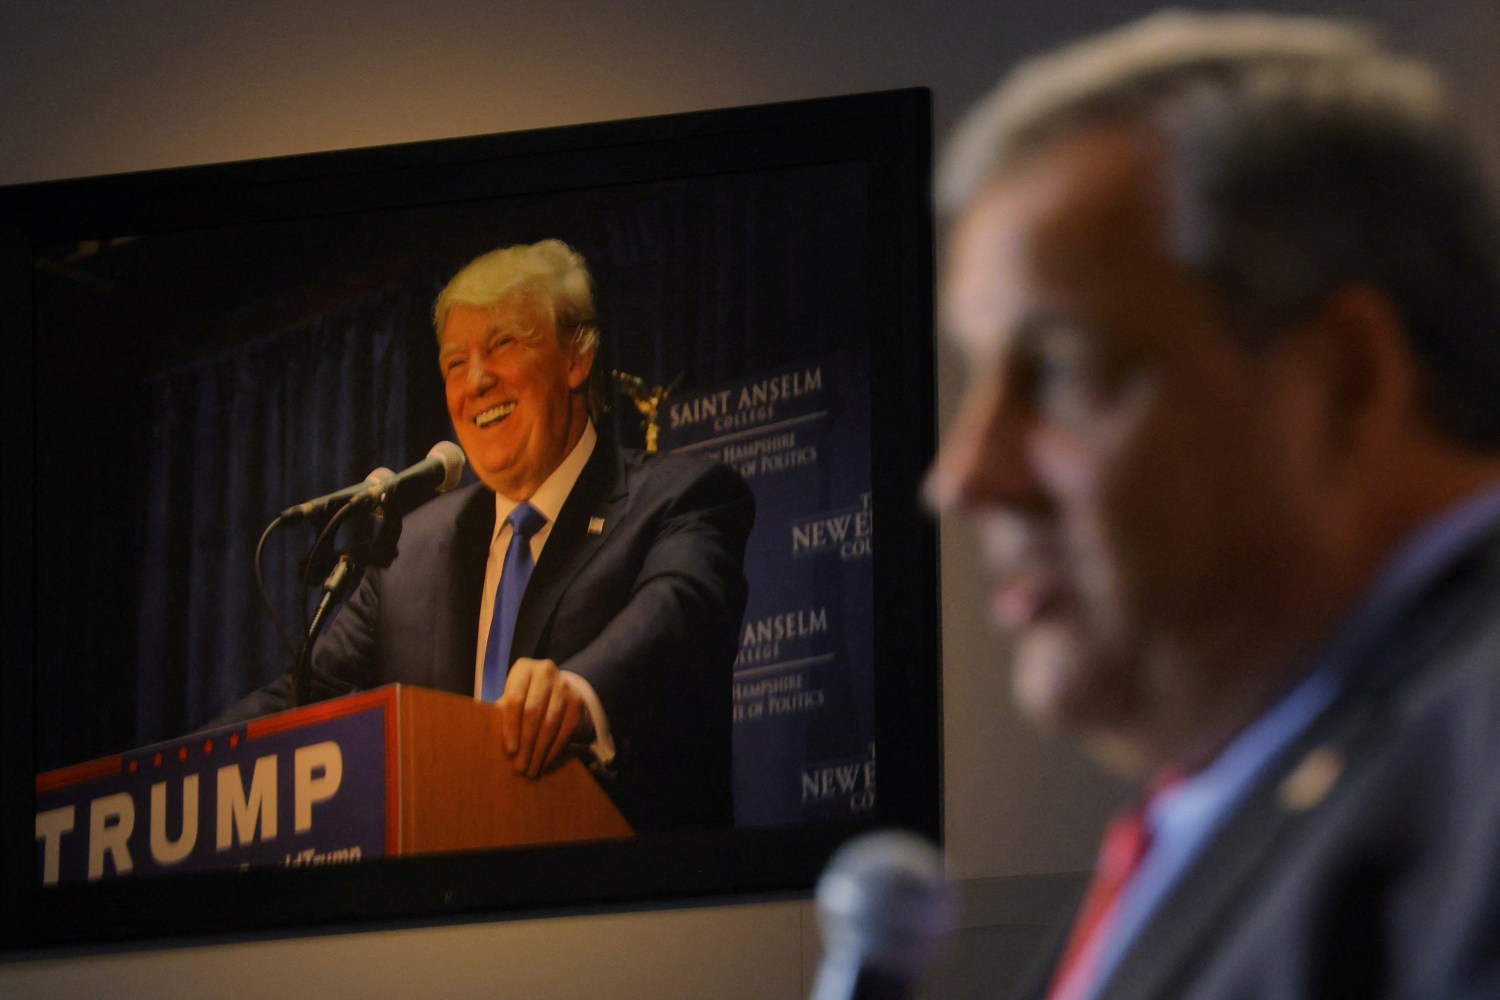 FILE PHOTO: A photograph of former U.S. President Donald Trump hangs on the wall as former New Jersey Governor Chris Christie speaks at the Institute of Politics at St. Anselm College in Manchester, New Hampshire, U.S., March 27, 2023.     REUTERS/Brian Snyder/File Photo